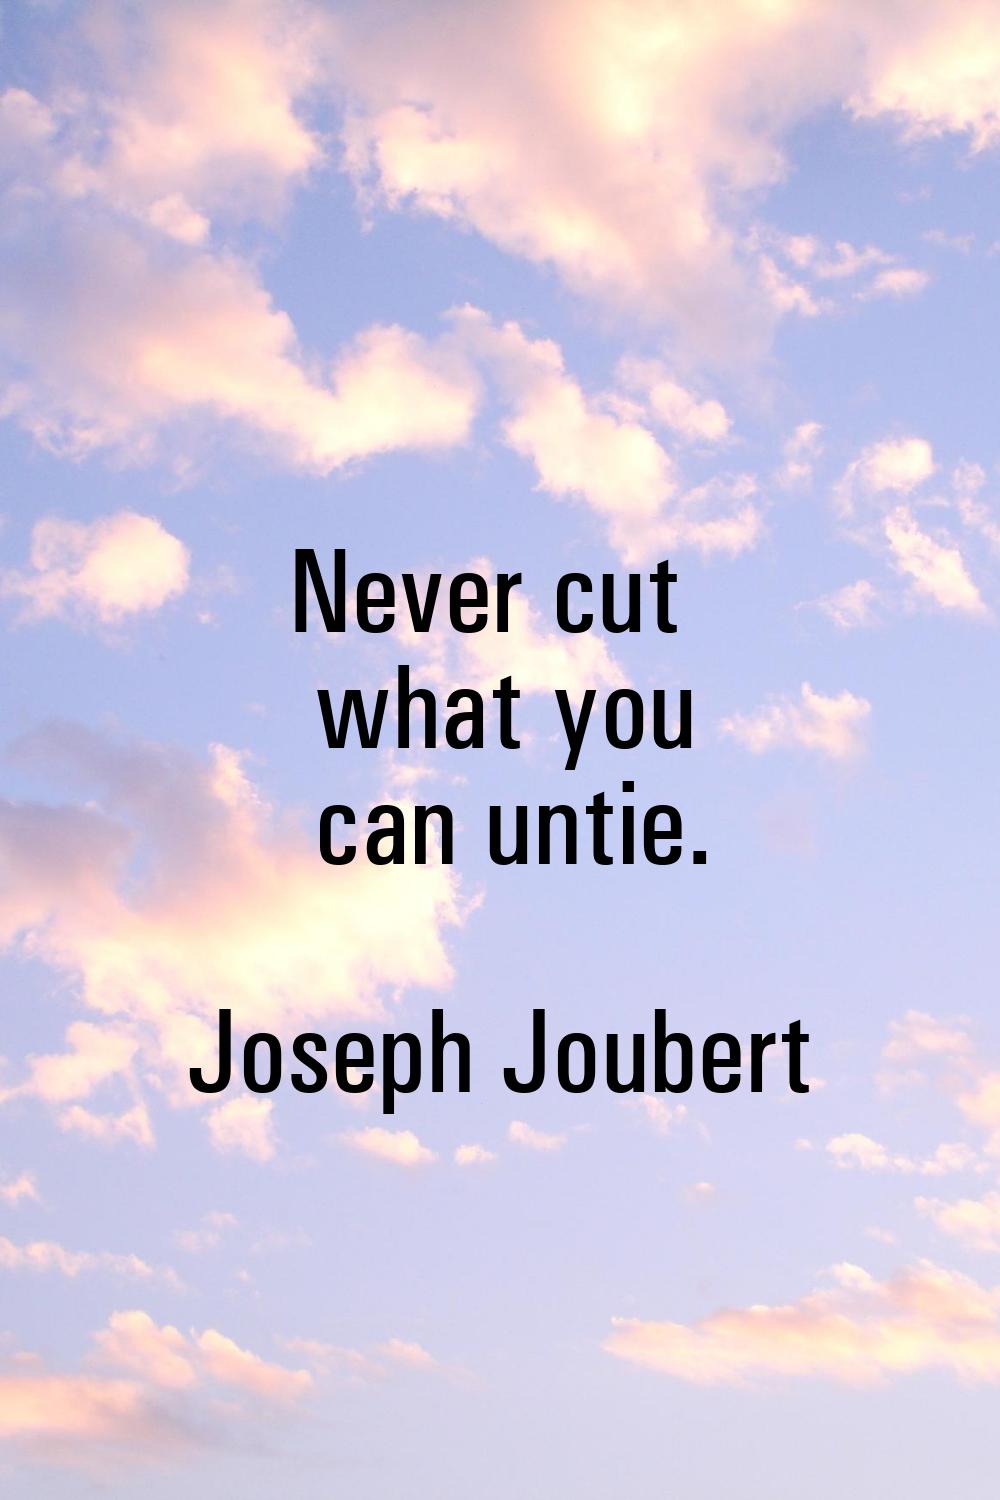 Never cut what you can untie.